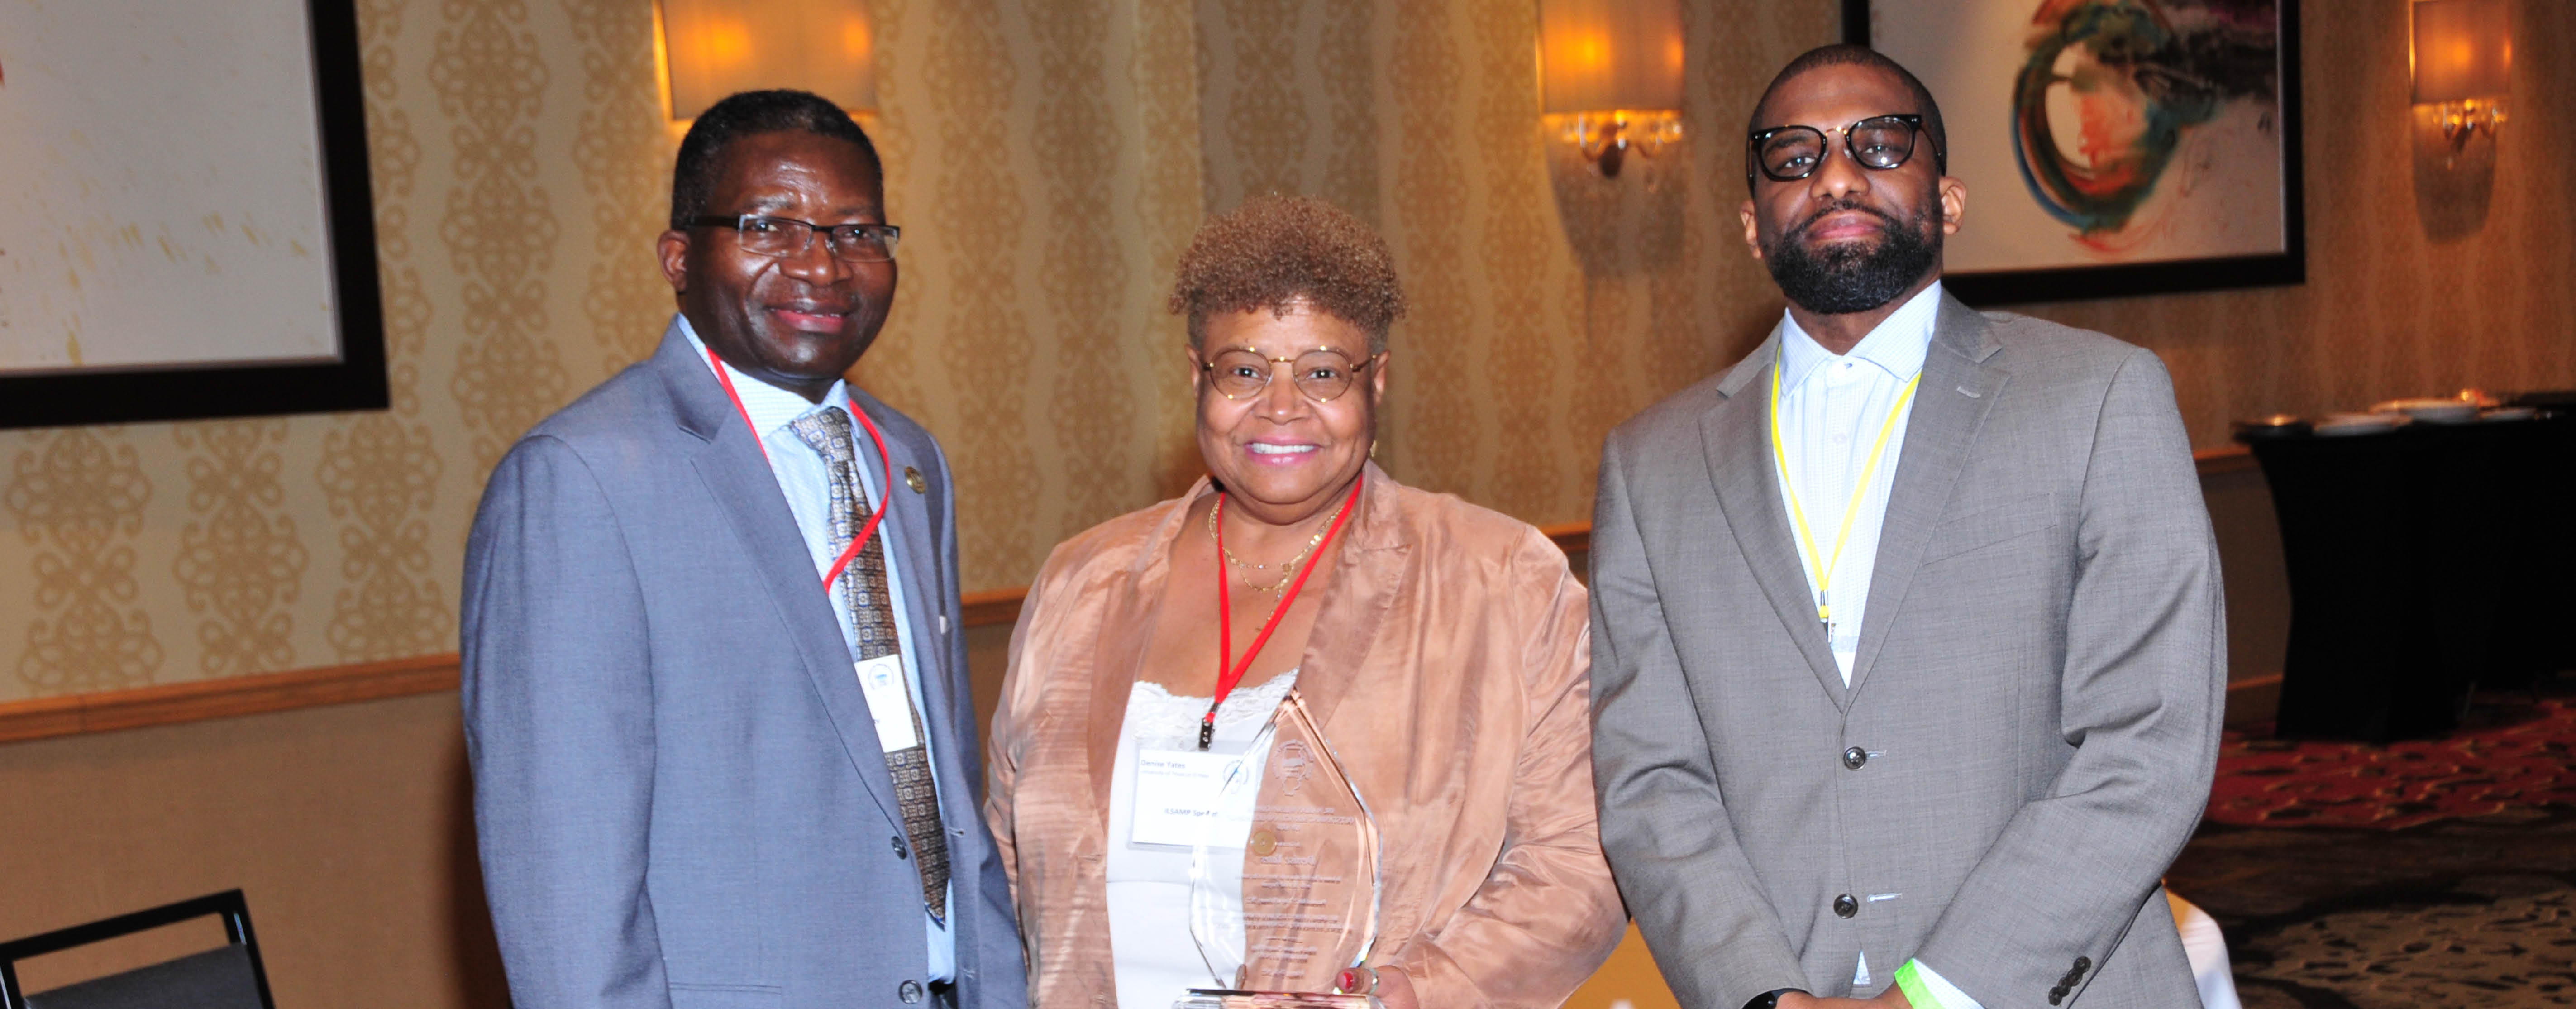 UTEP Senior Research Scientist receives the Dr. Marian Wilson-Comer LSAMP Service and Leadership Award 